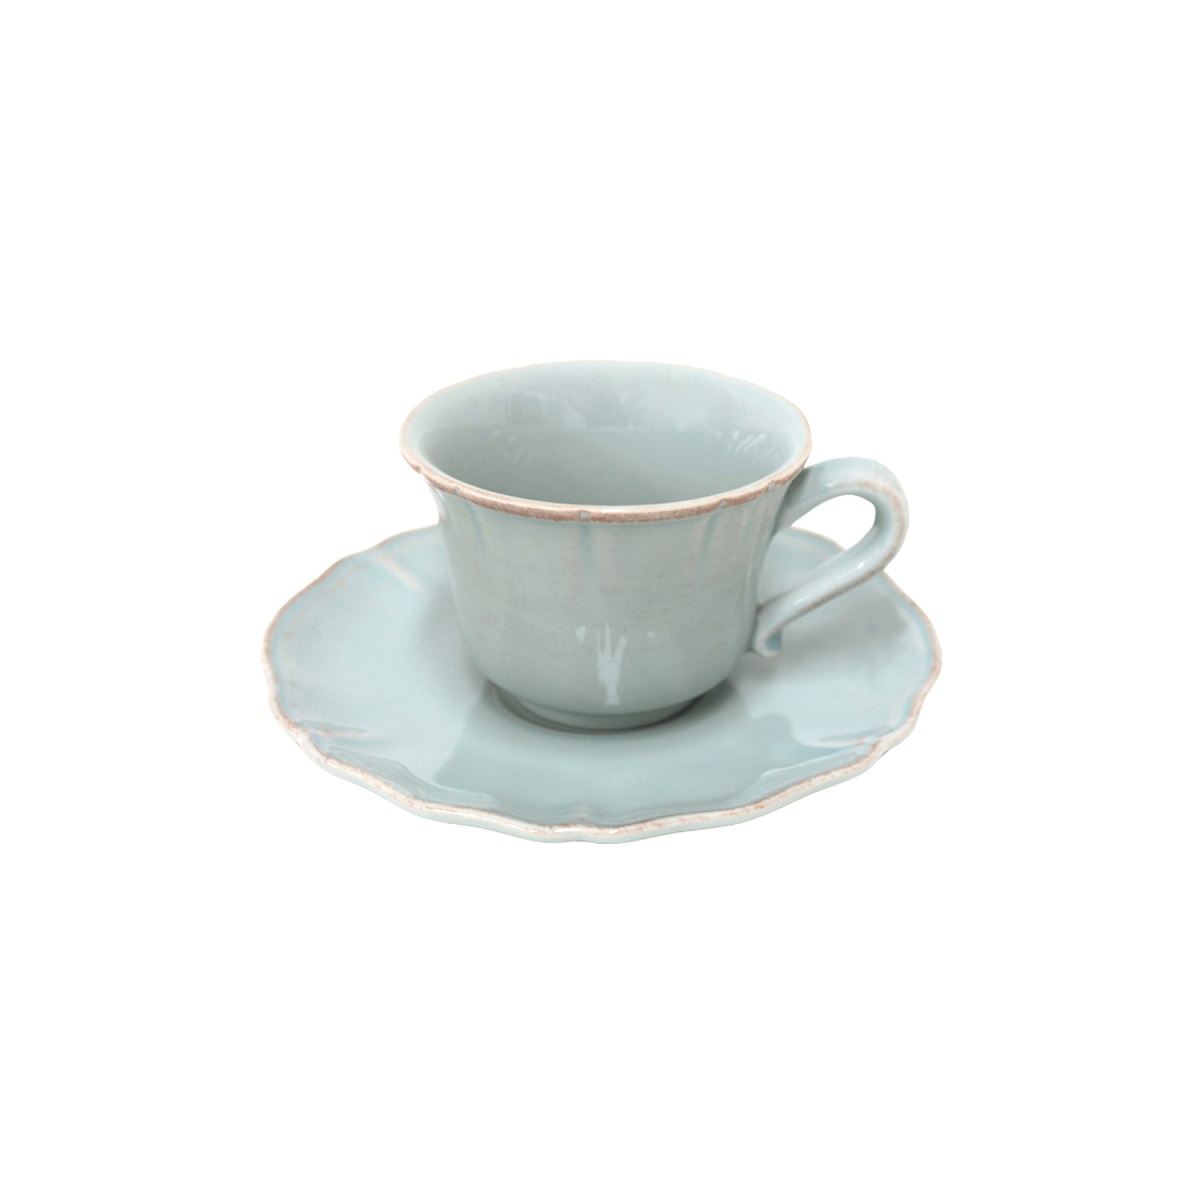 Alentejo Turquoise Tea Cup & Saucer Gift